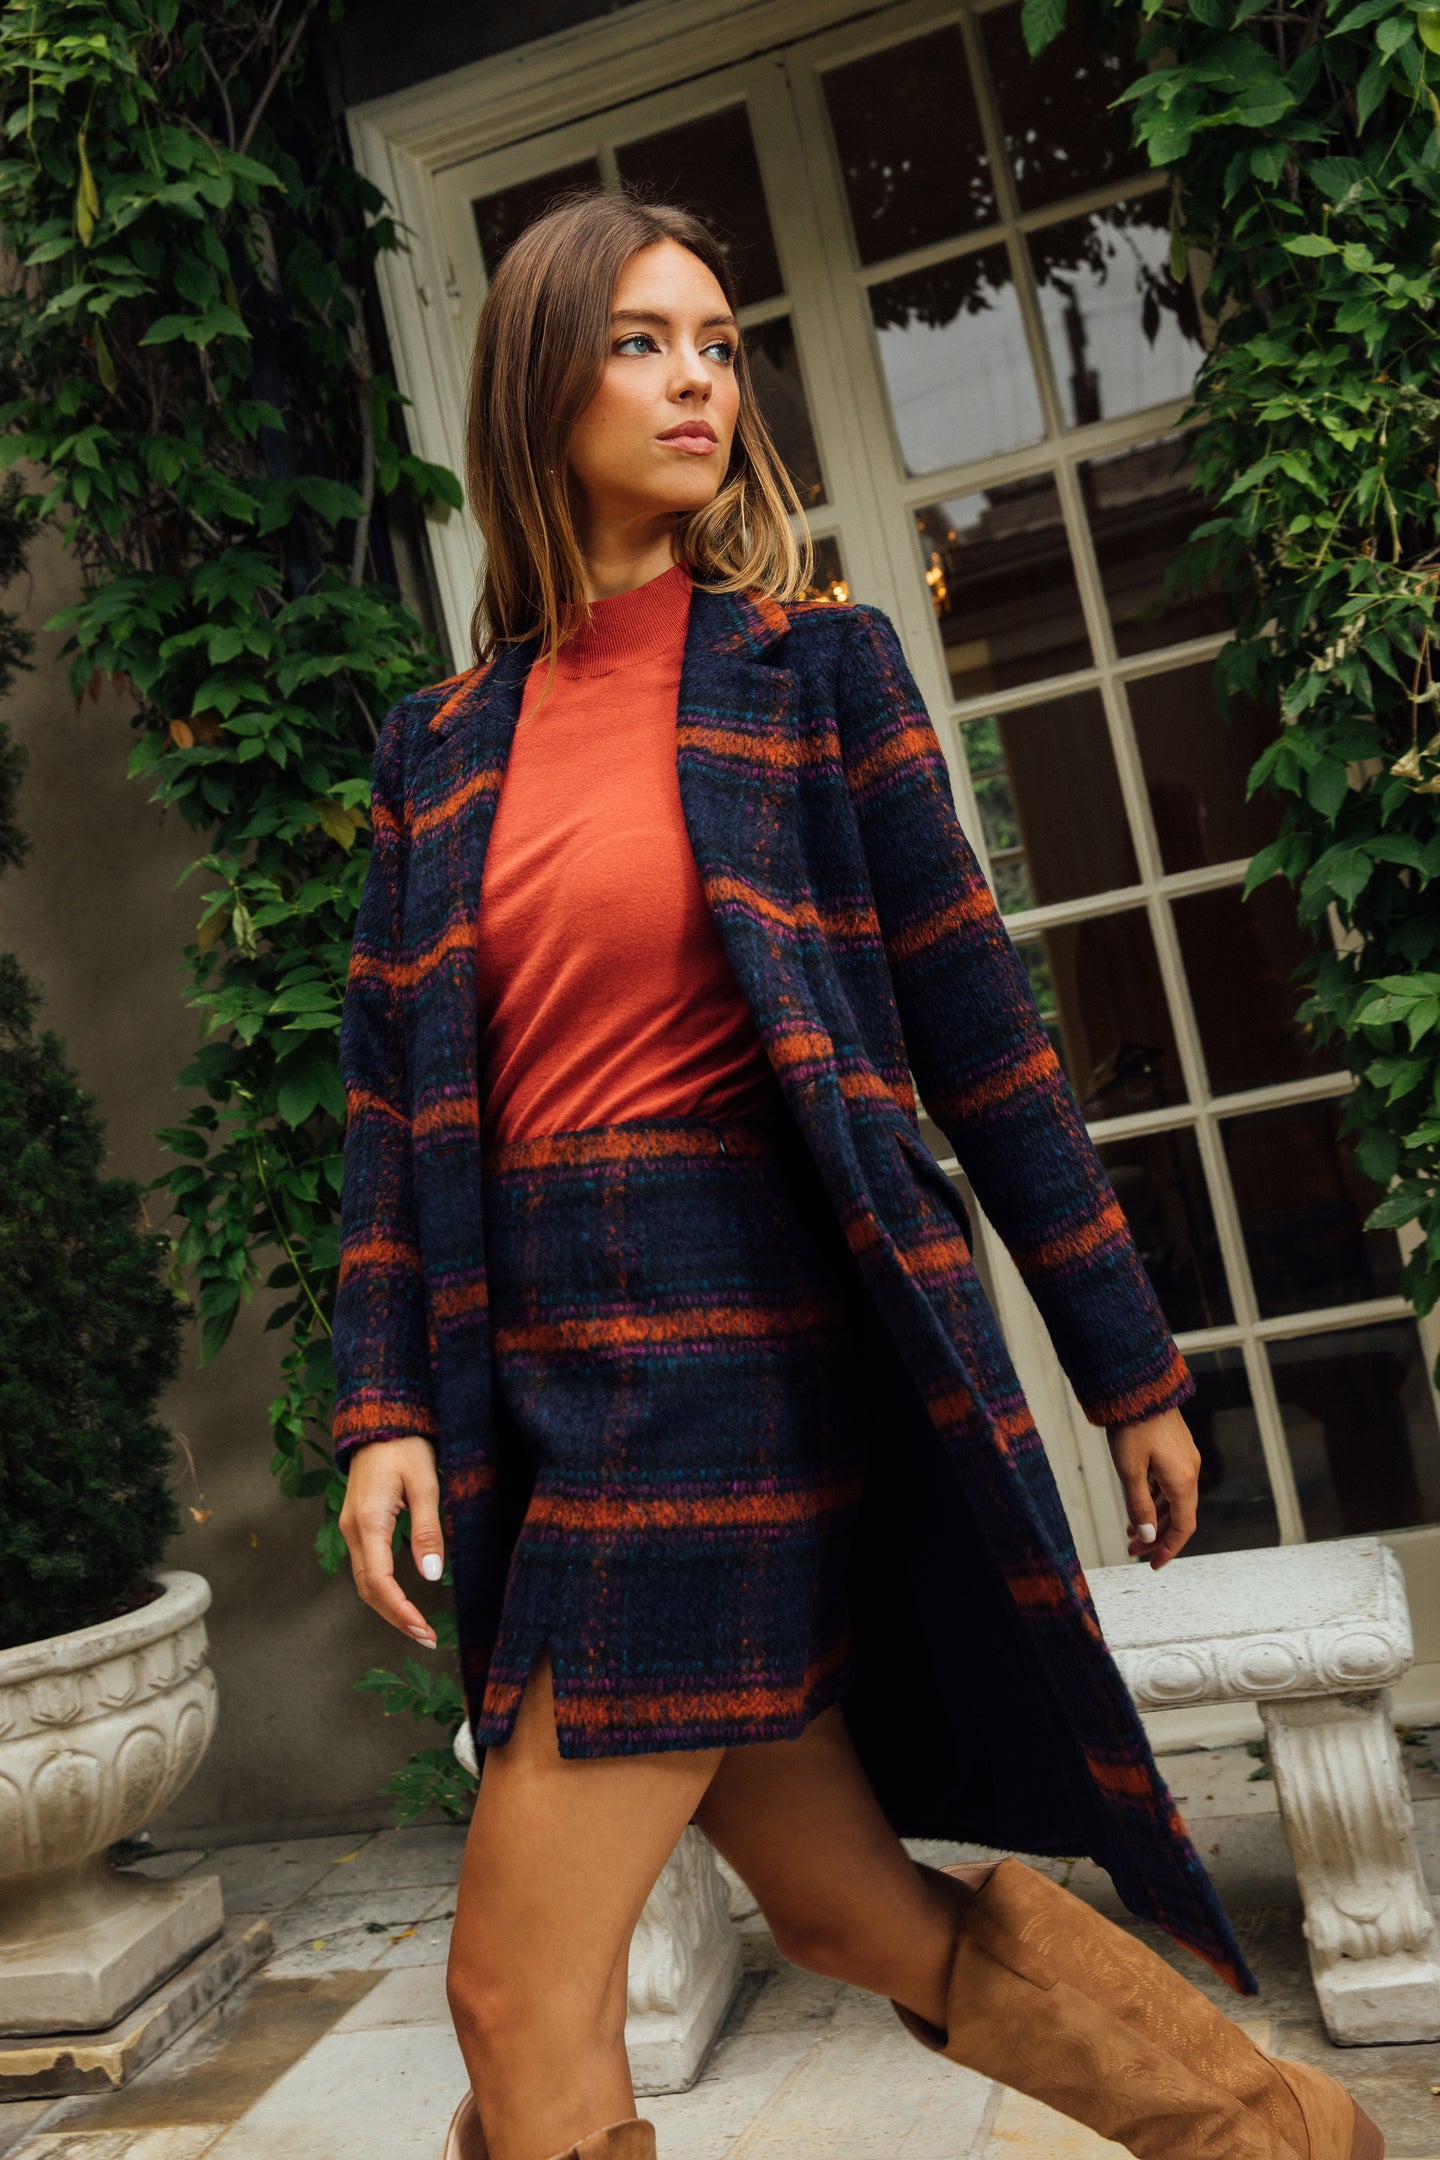 Double Breasted Plaid Coat